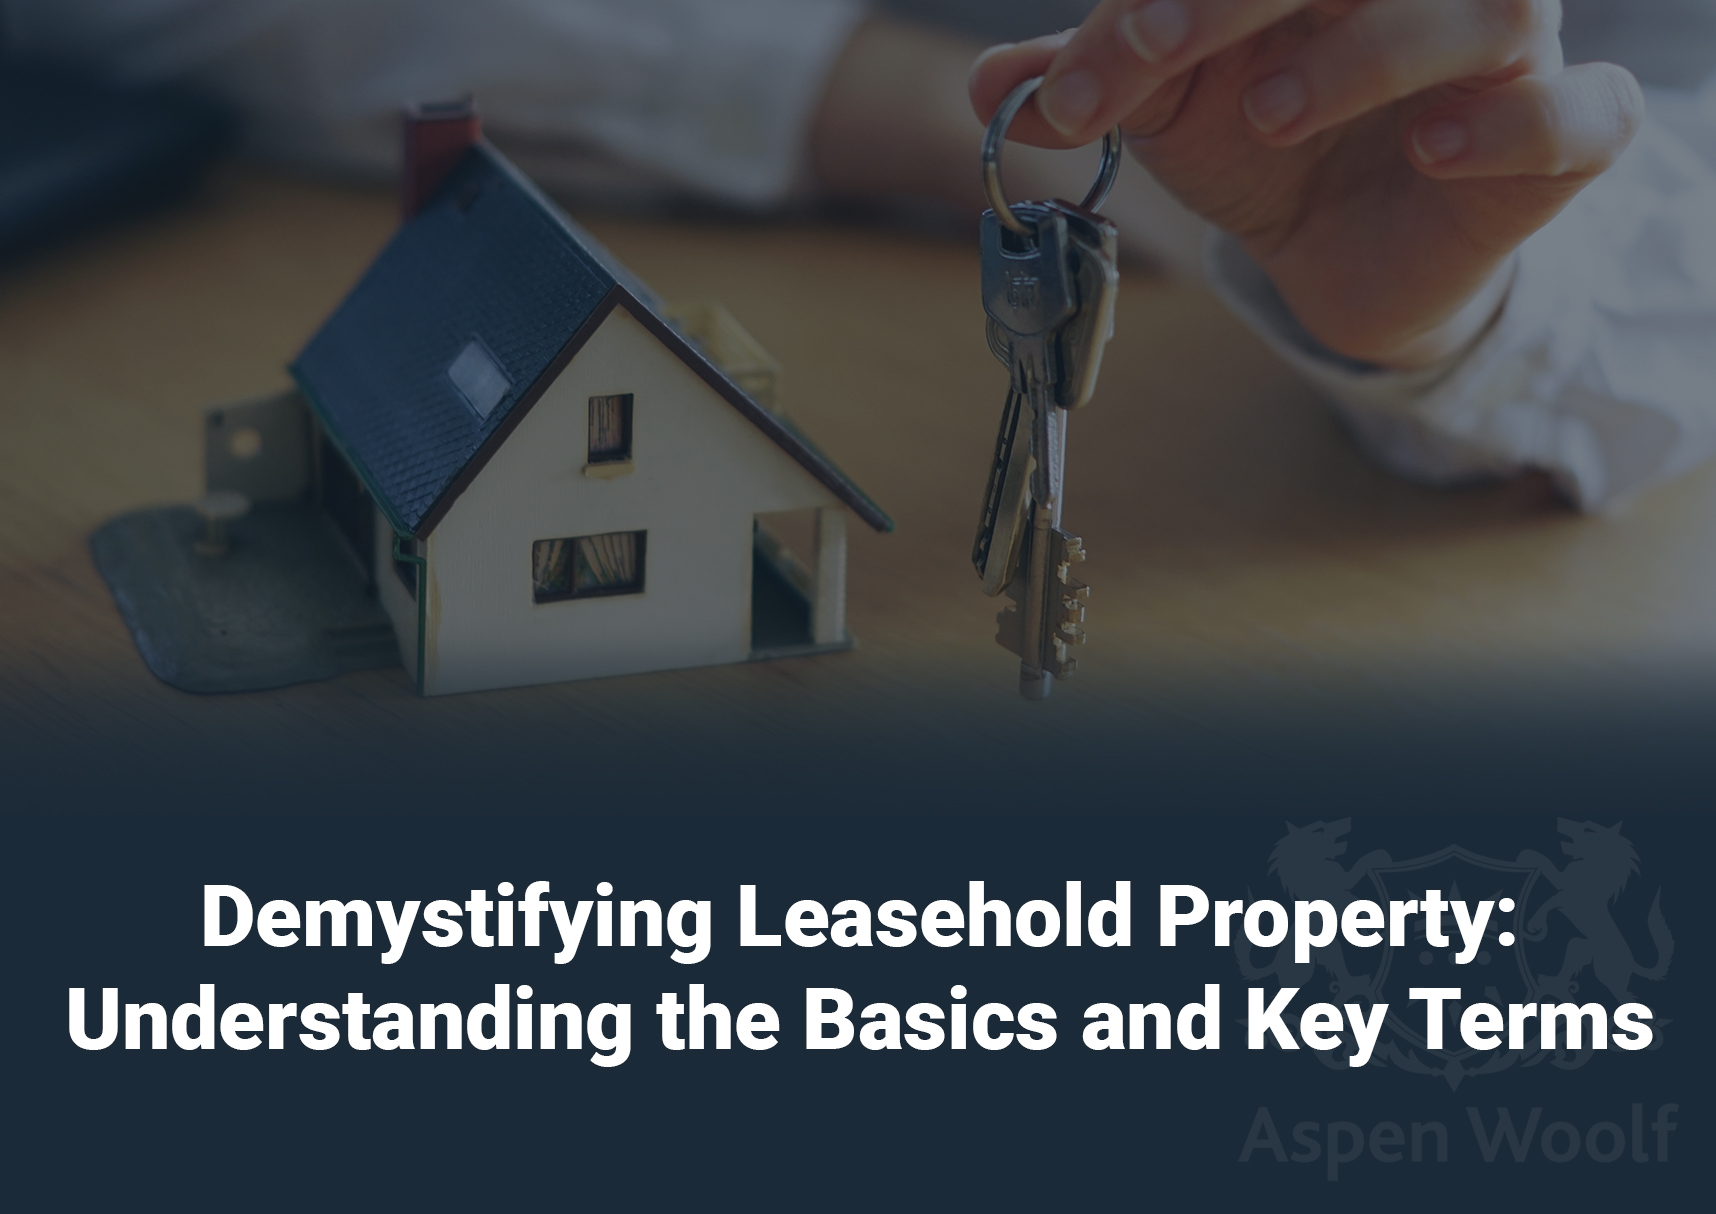 Leasehold Property: Understanding the Basics and Key Terms